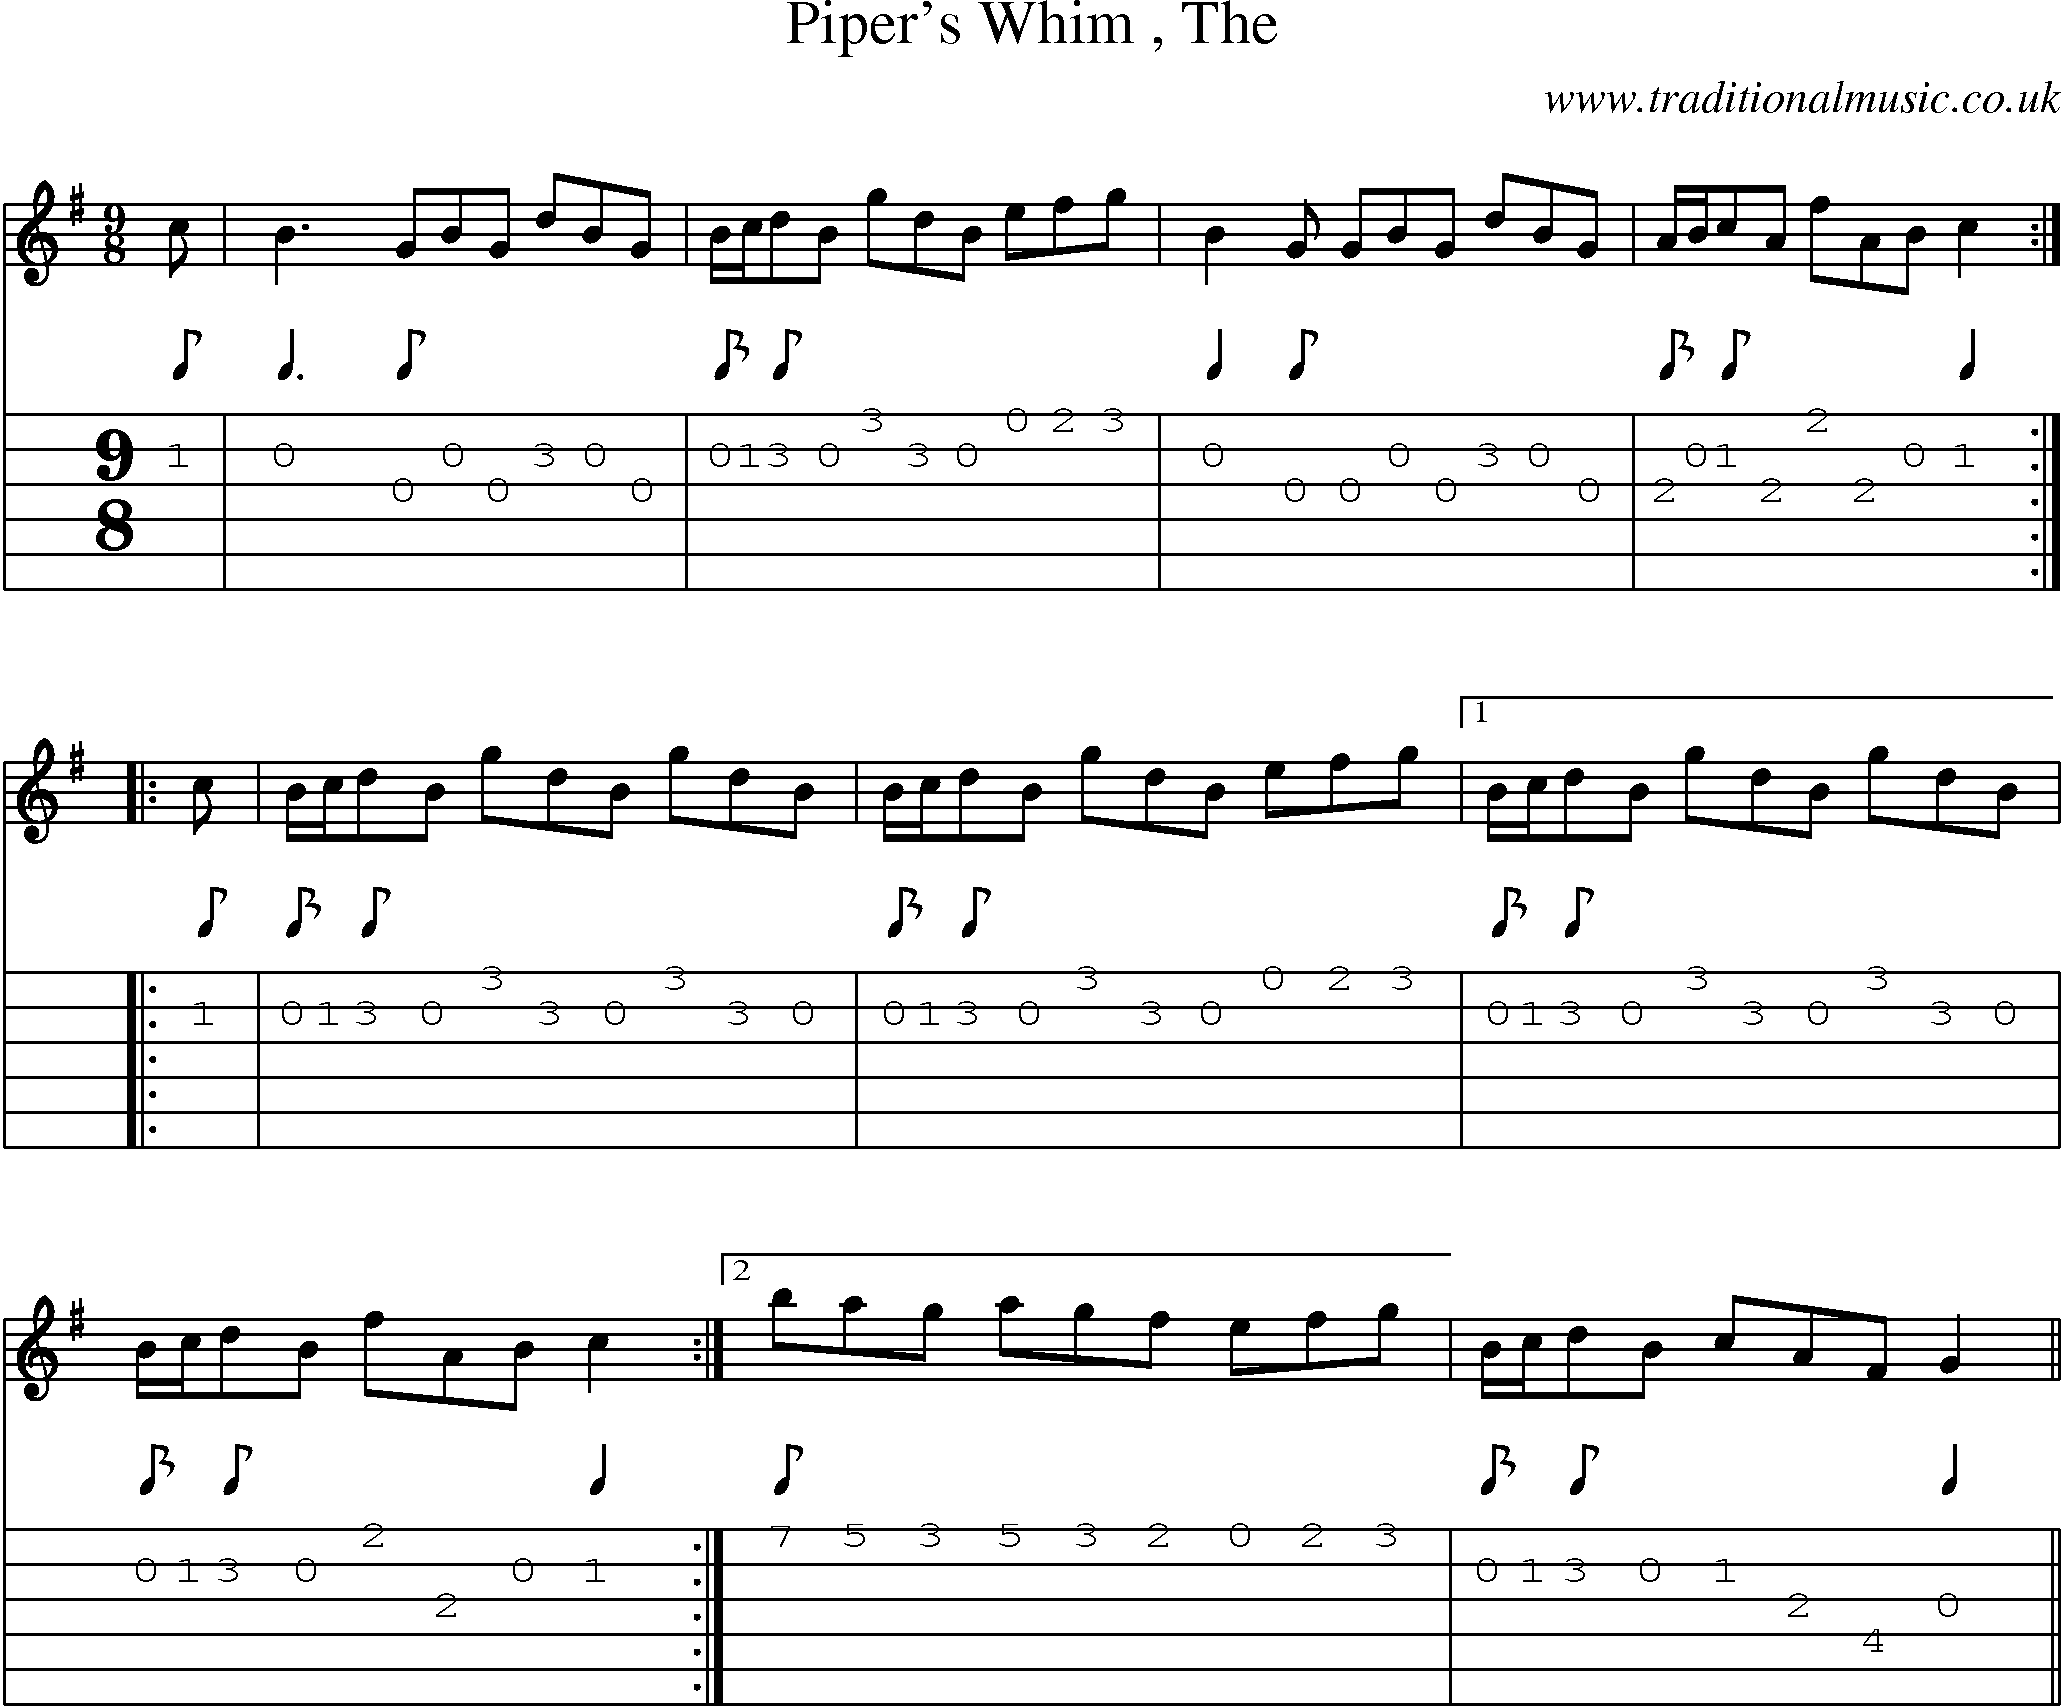 Music Score and Guitar Tabs for Pipers Whim